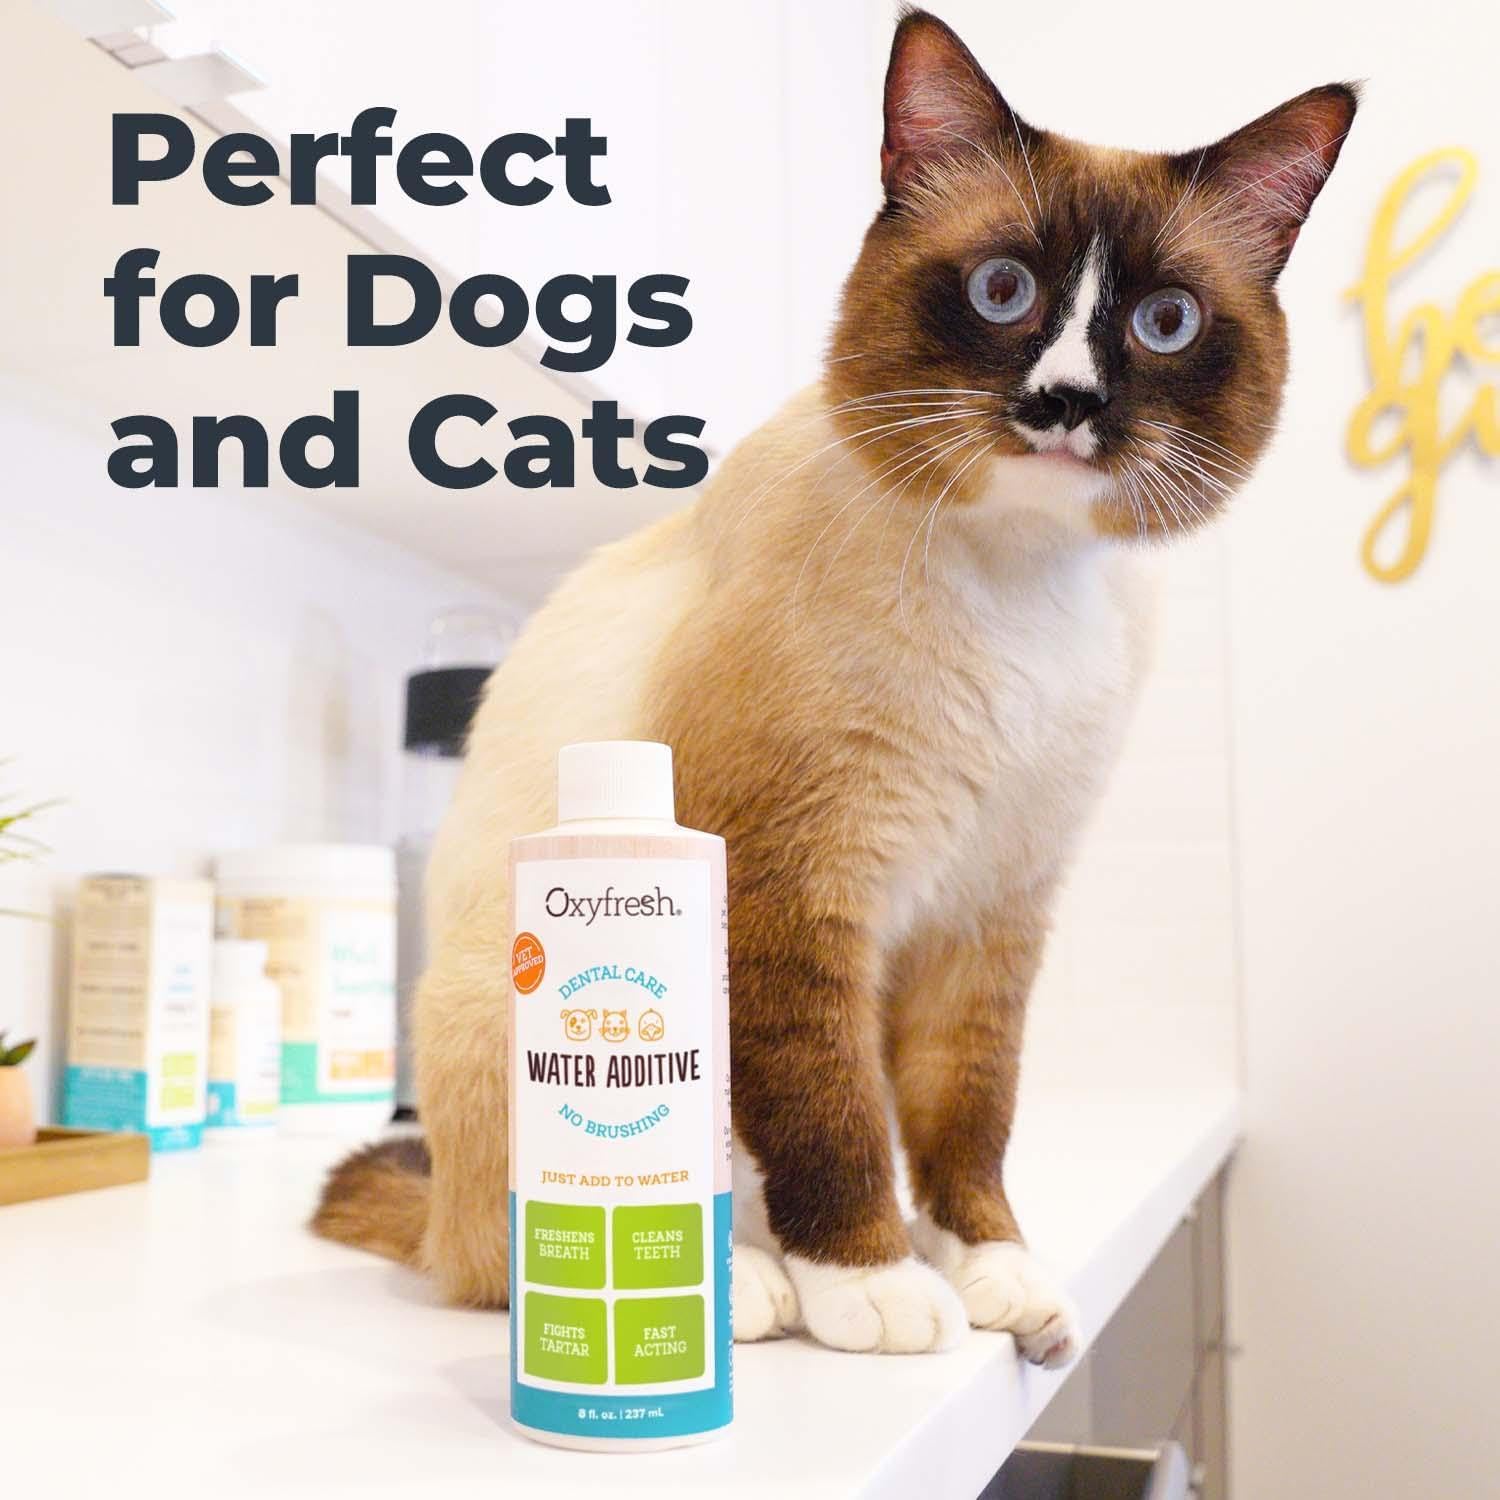 Oxyfresh Premium Pet Dental Care Solution Pet Water Additive: Best Way to Eliminate Bad Dog Breath and Cat Bad Breath - Fights Tartar & Plaque - So Easy, Just Add to Water! Vet Recommended 16 oz. : Pet Supplies